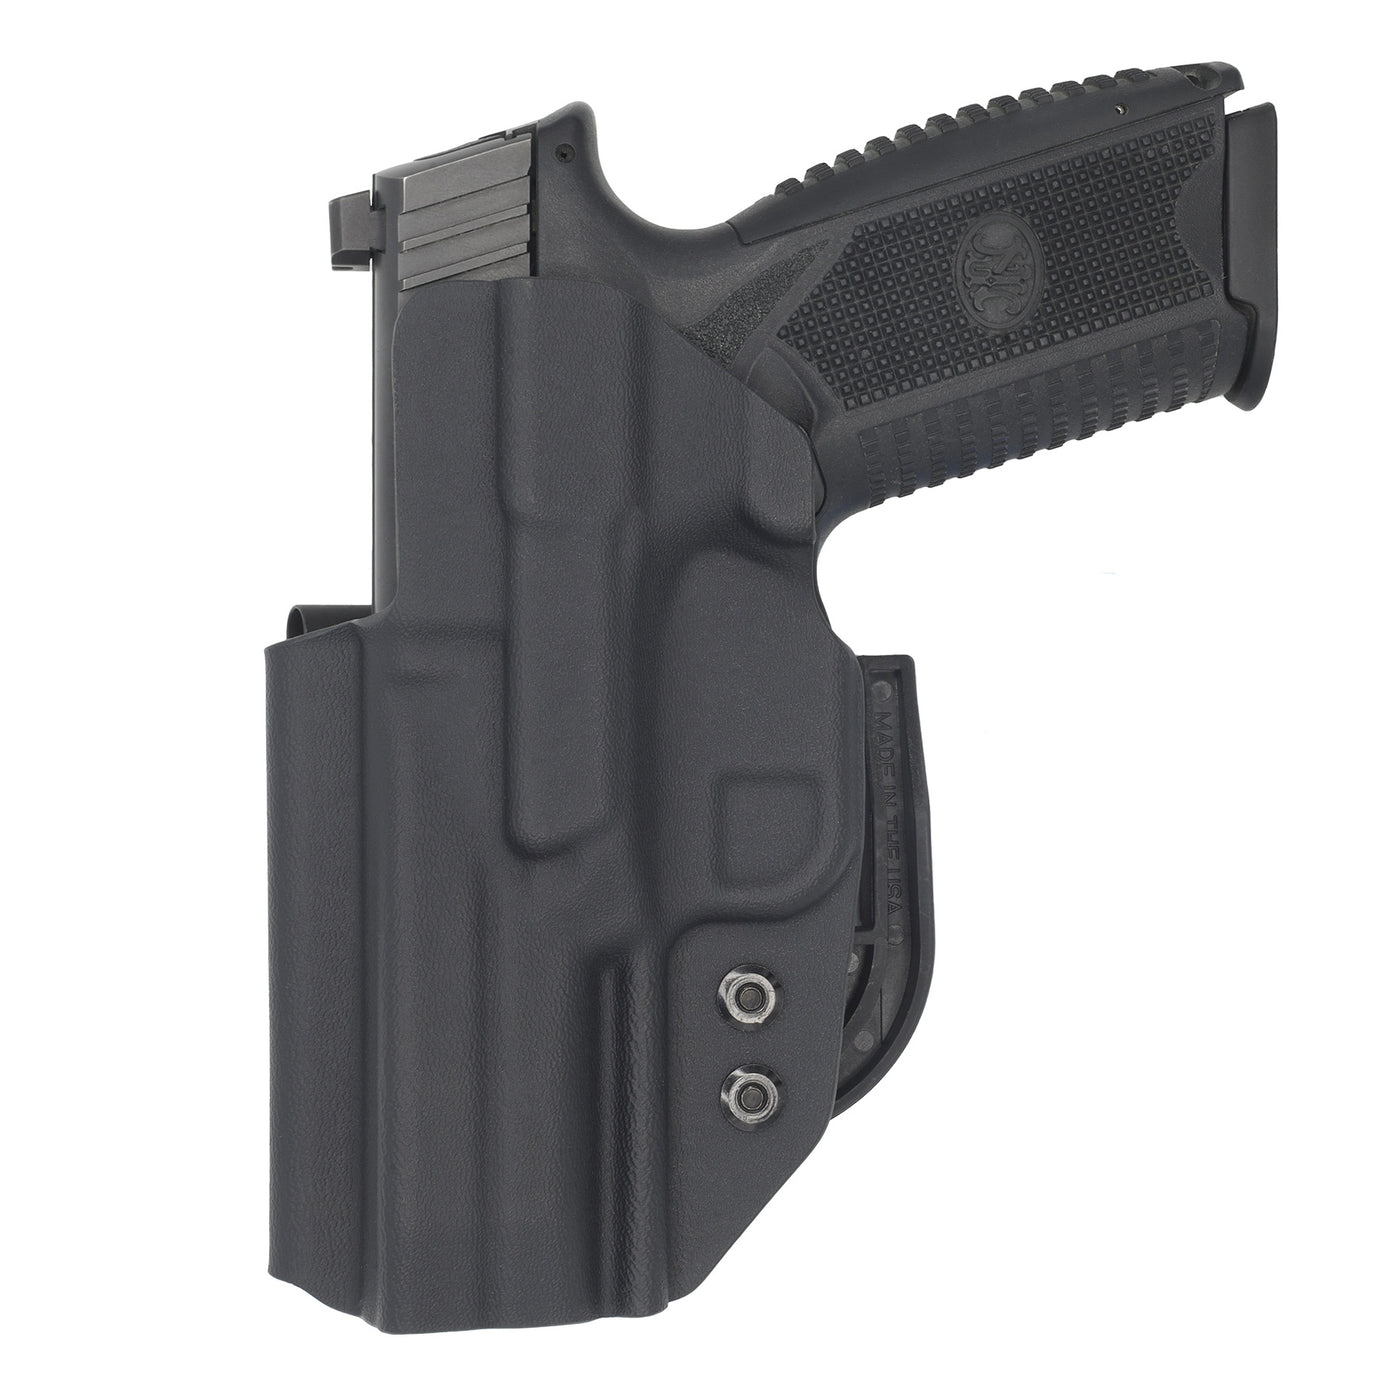 FN 509/t Tactical IWB ALPHA UPGRADE verison holster from the back showing the Darkwing attachment and the DCC metal clips. This is made by C and G Holsters out of Kydex. This images shows the FN509T in the holstered position